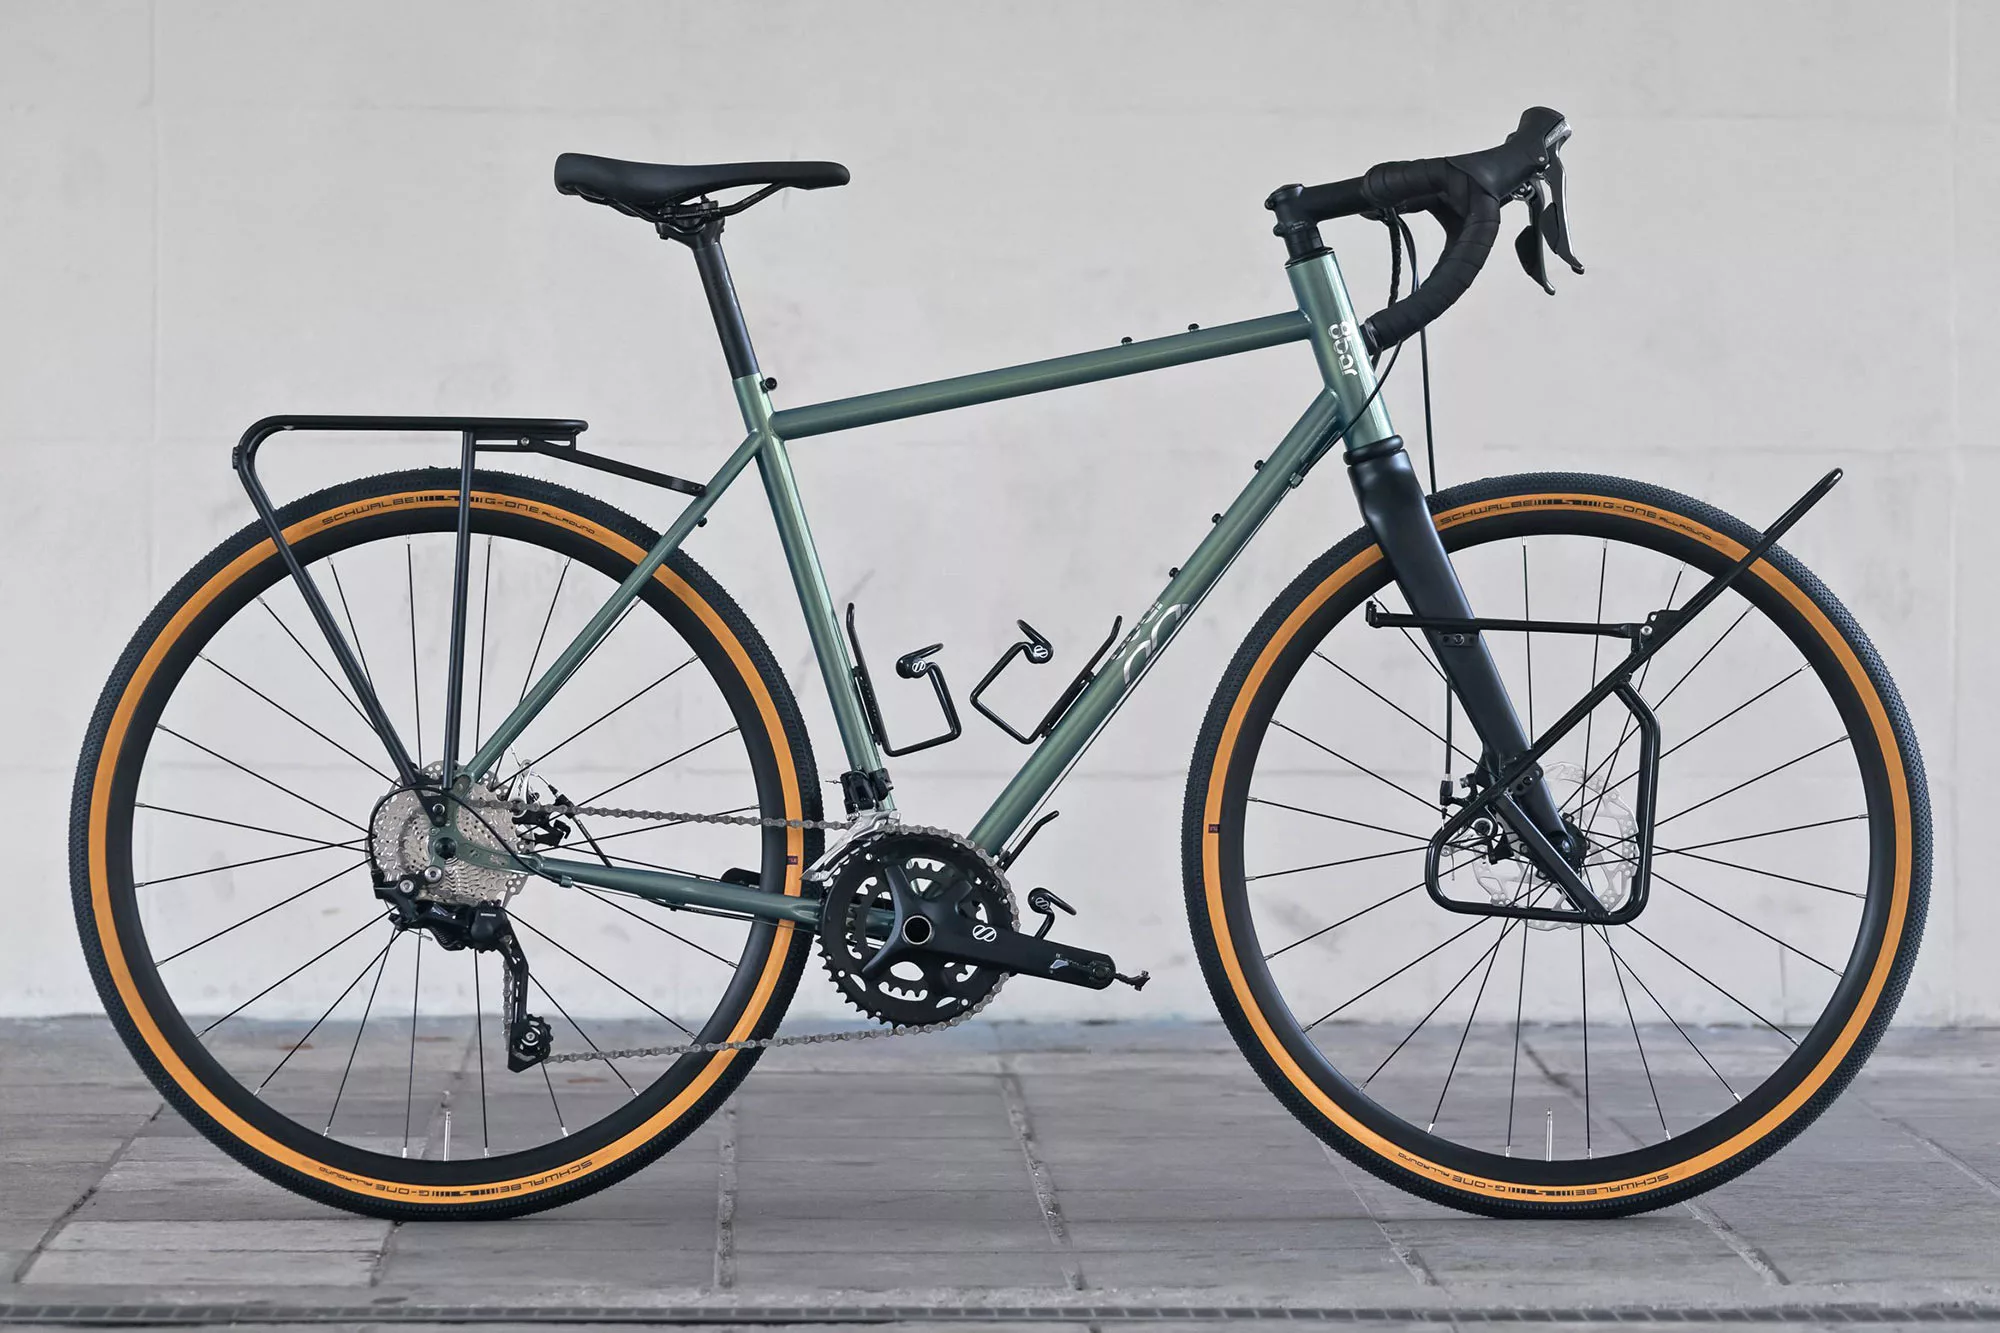 8bar Pankow affordable steel gravel commuter touring bike, photo by Stefan Haehnel, complete